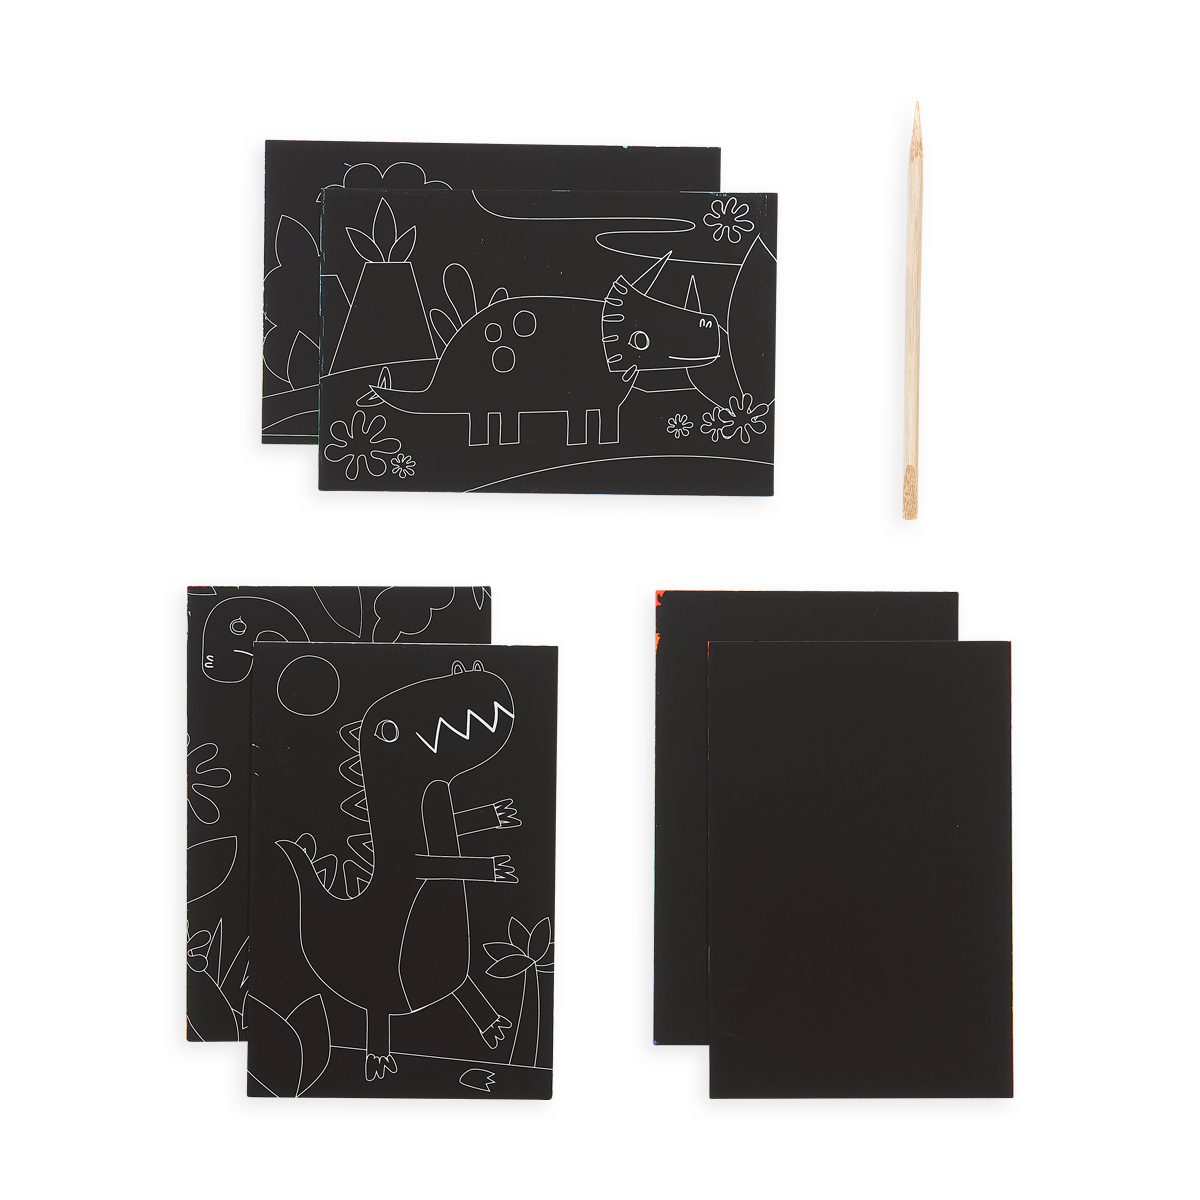 Image of the Dinosaur Days Scratch and Scribble Mini Scratch Art Kit contents which includes 6 sheets and one wooden stylus.  